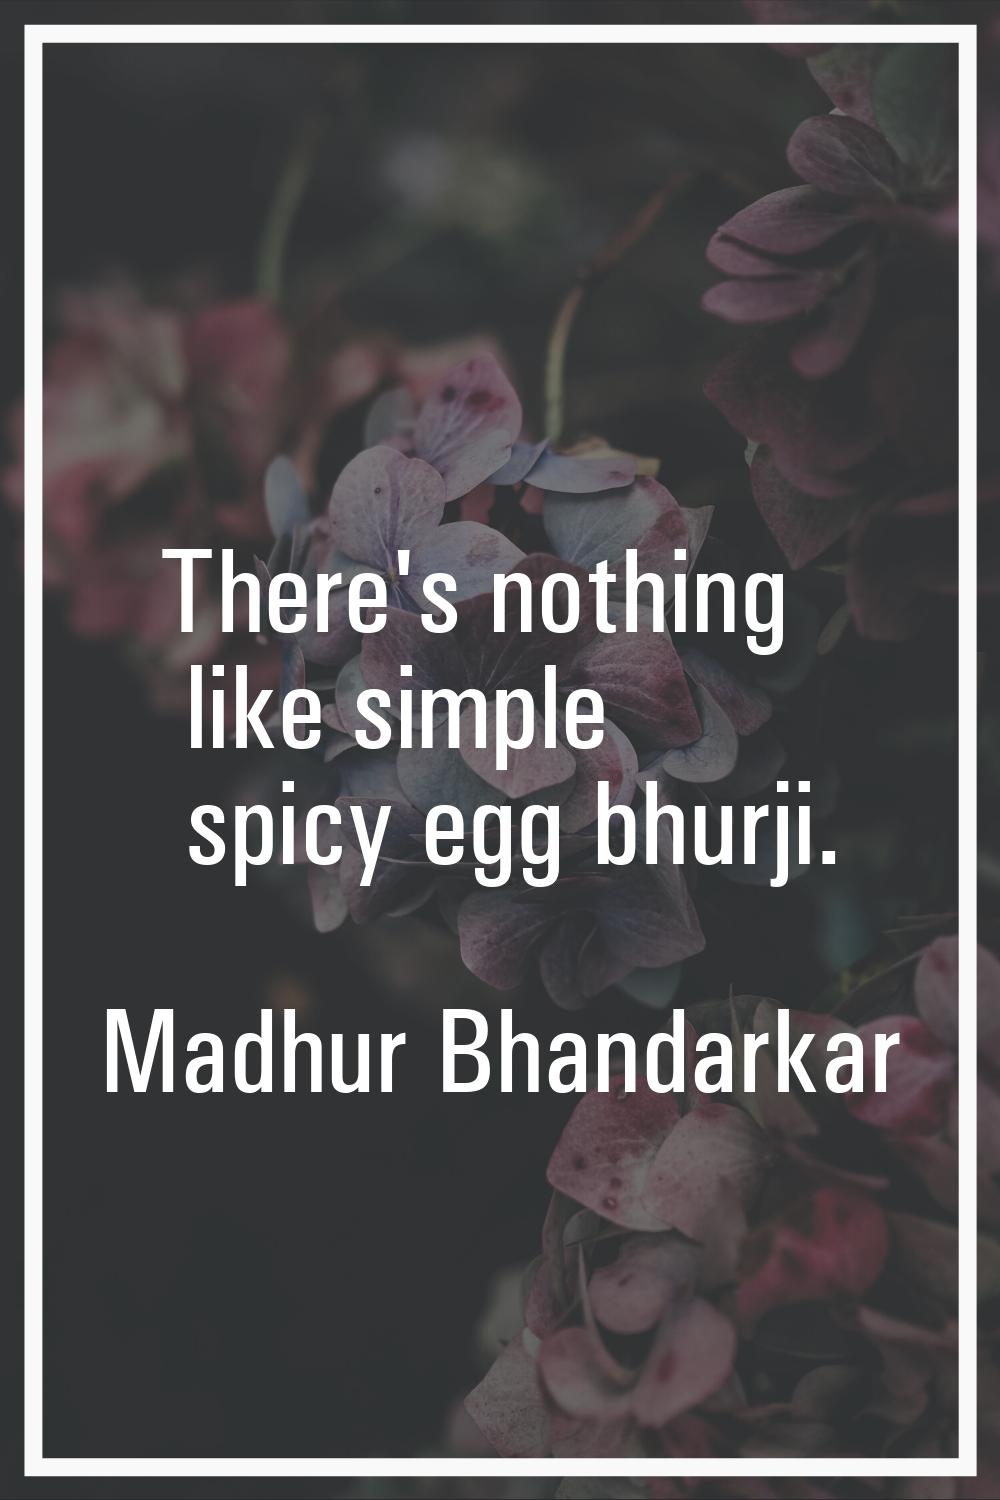 There's nothing like simple spicy egg bhurji.